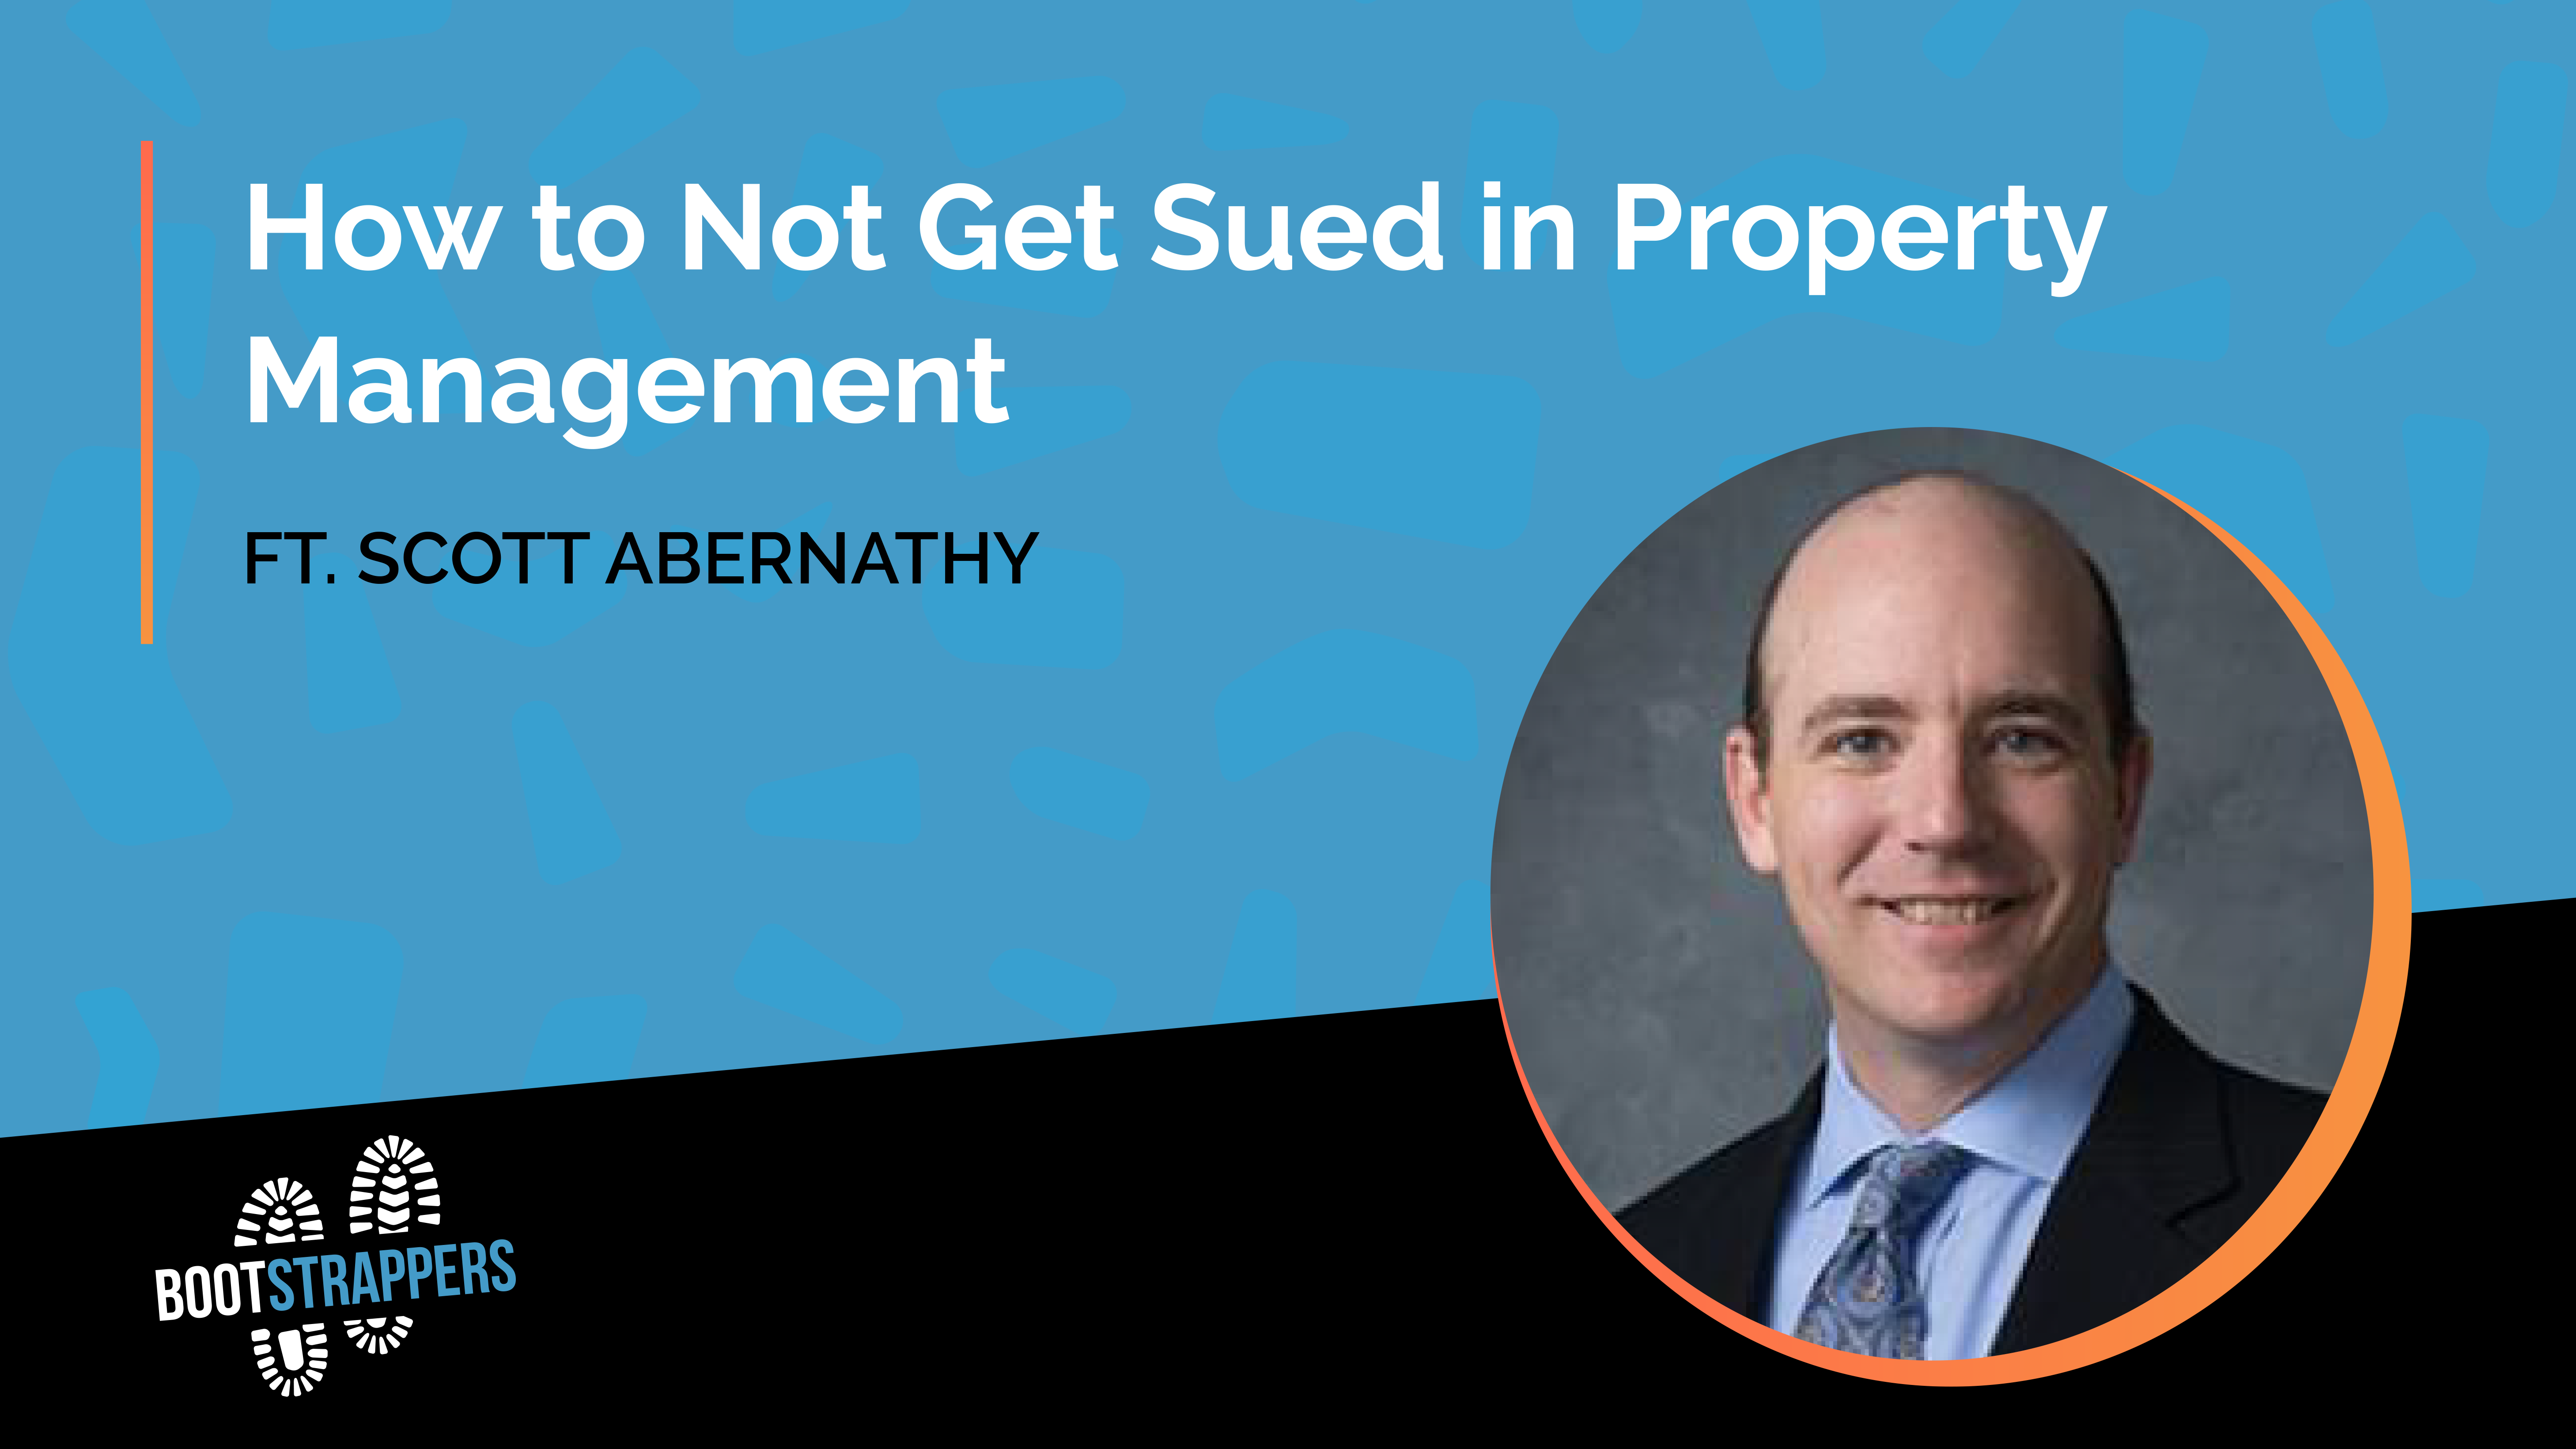 anequim-bootstrappers-how-to-not-get-sued-in-property-management